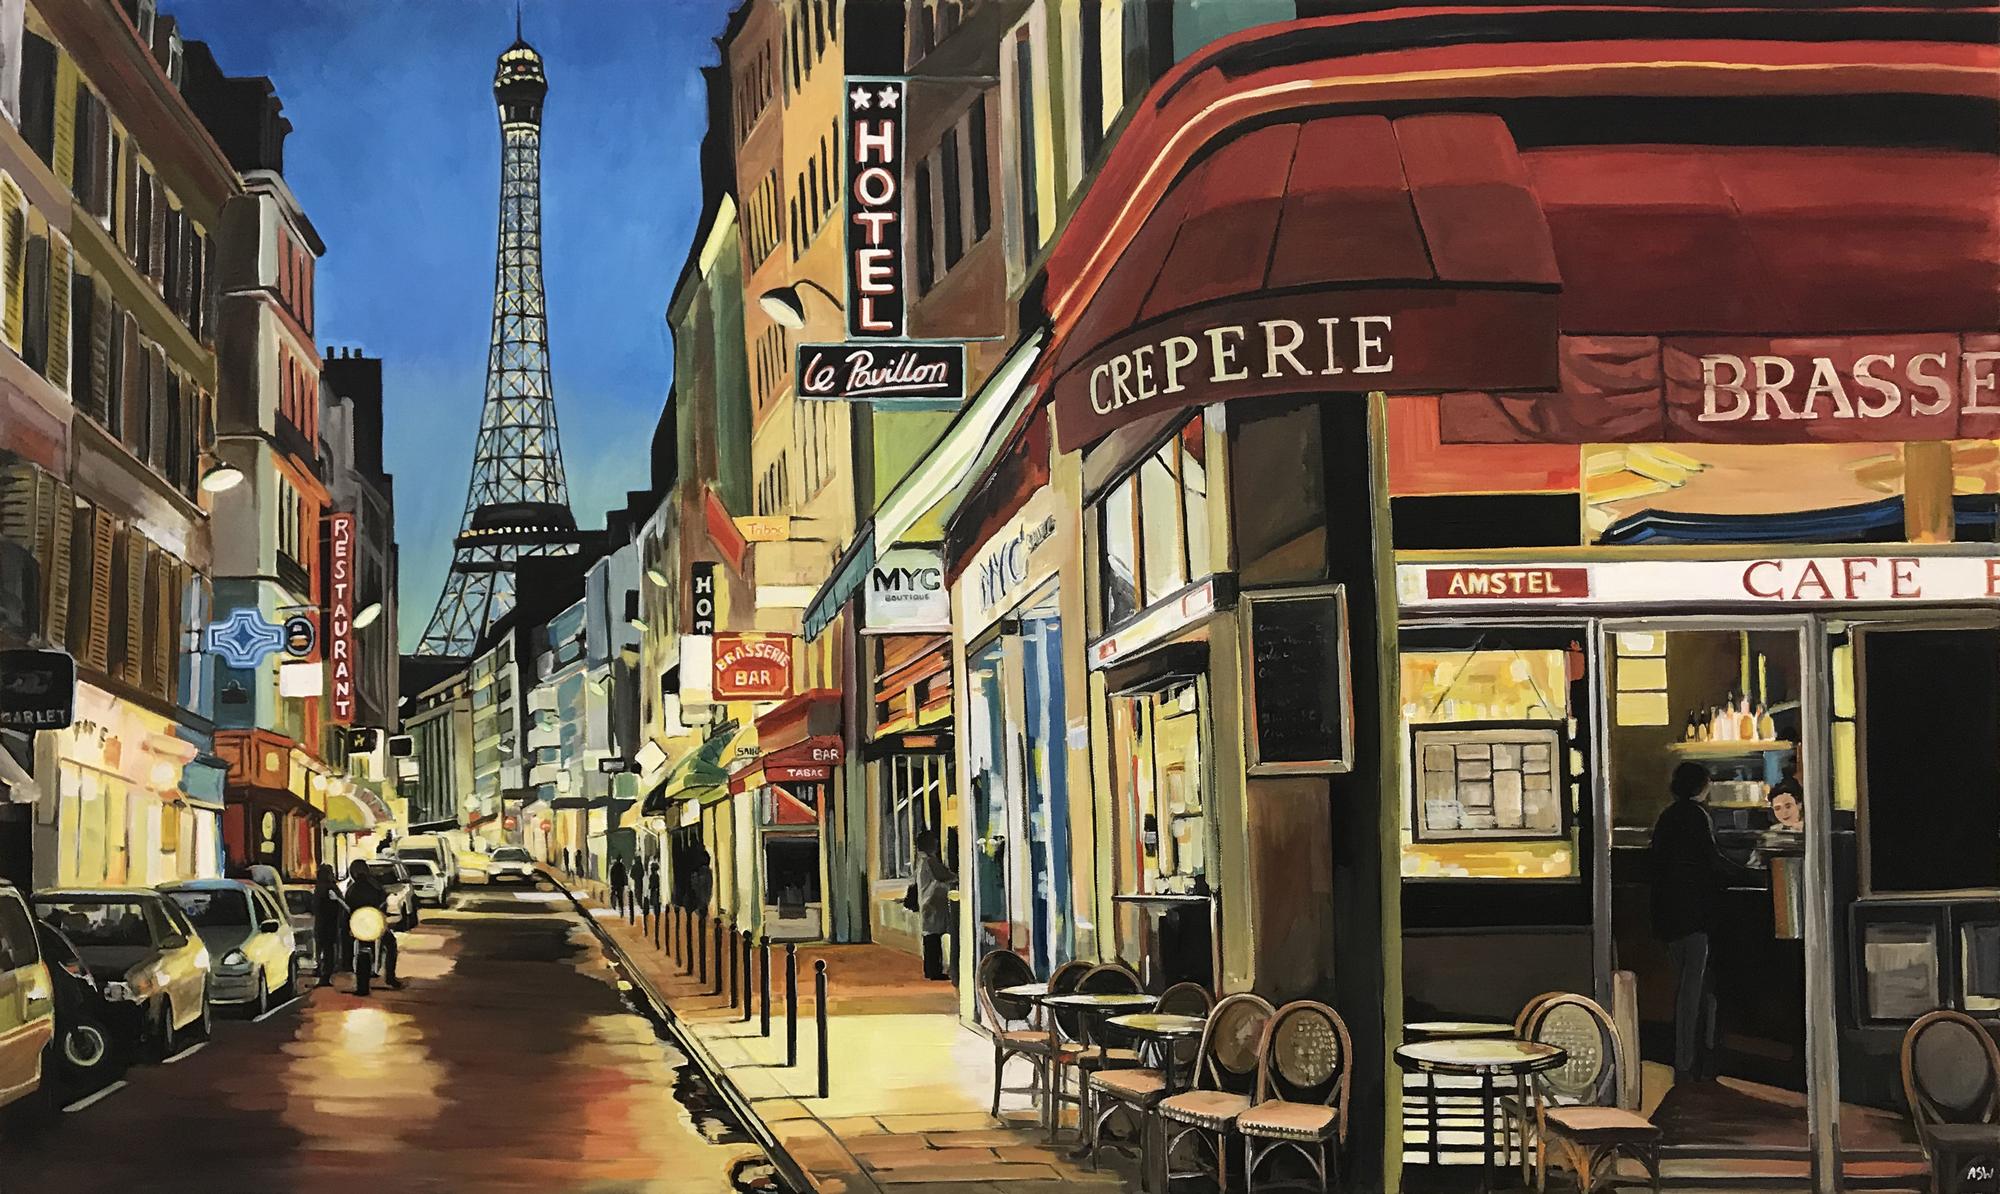 Paris Café with Eiffel Tower France Limited Edition Print of Figurative Cityscape Painting by Leading British Urban Landscape Artist, Angela Wakefield. 

Print measures 16 x 9.5 inches 
Paper Weight Heavy 250gsm
Paper Type Perlino Cotton 
Paper Size